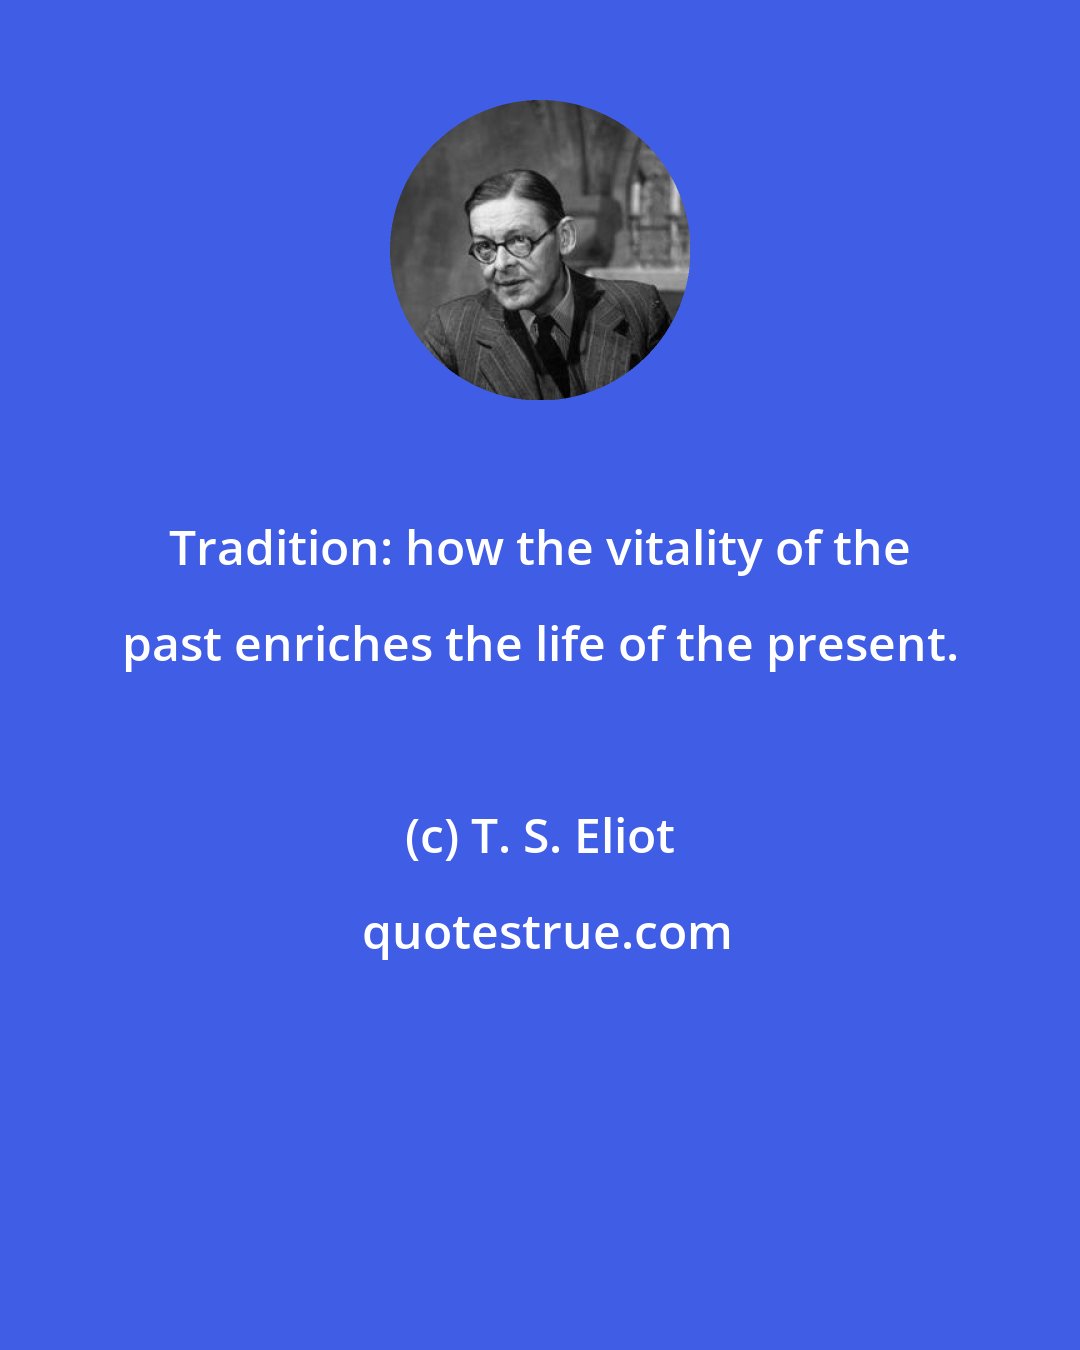 T. S. Eliot: Tradition: how the vitality of the past enriches the life of the present.